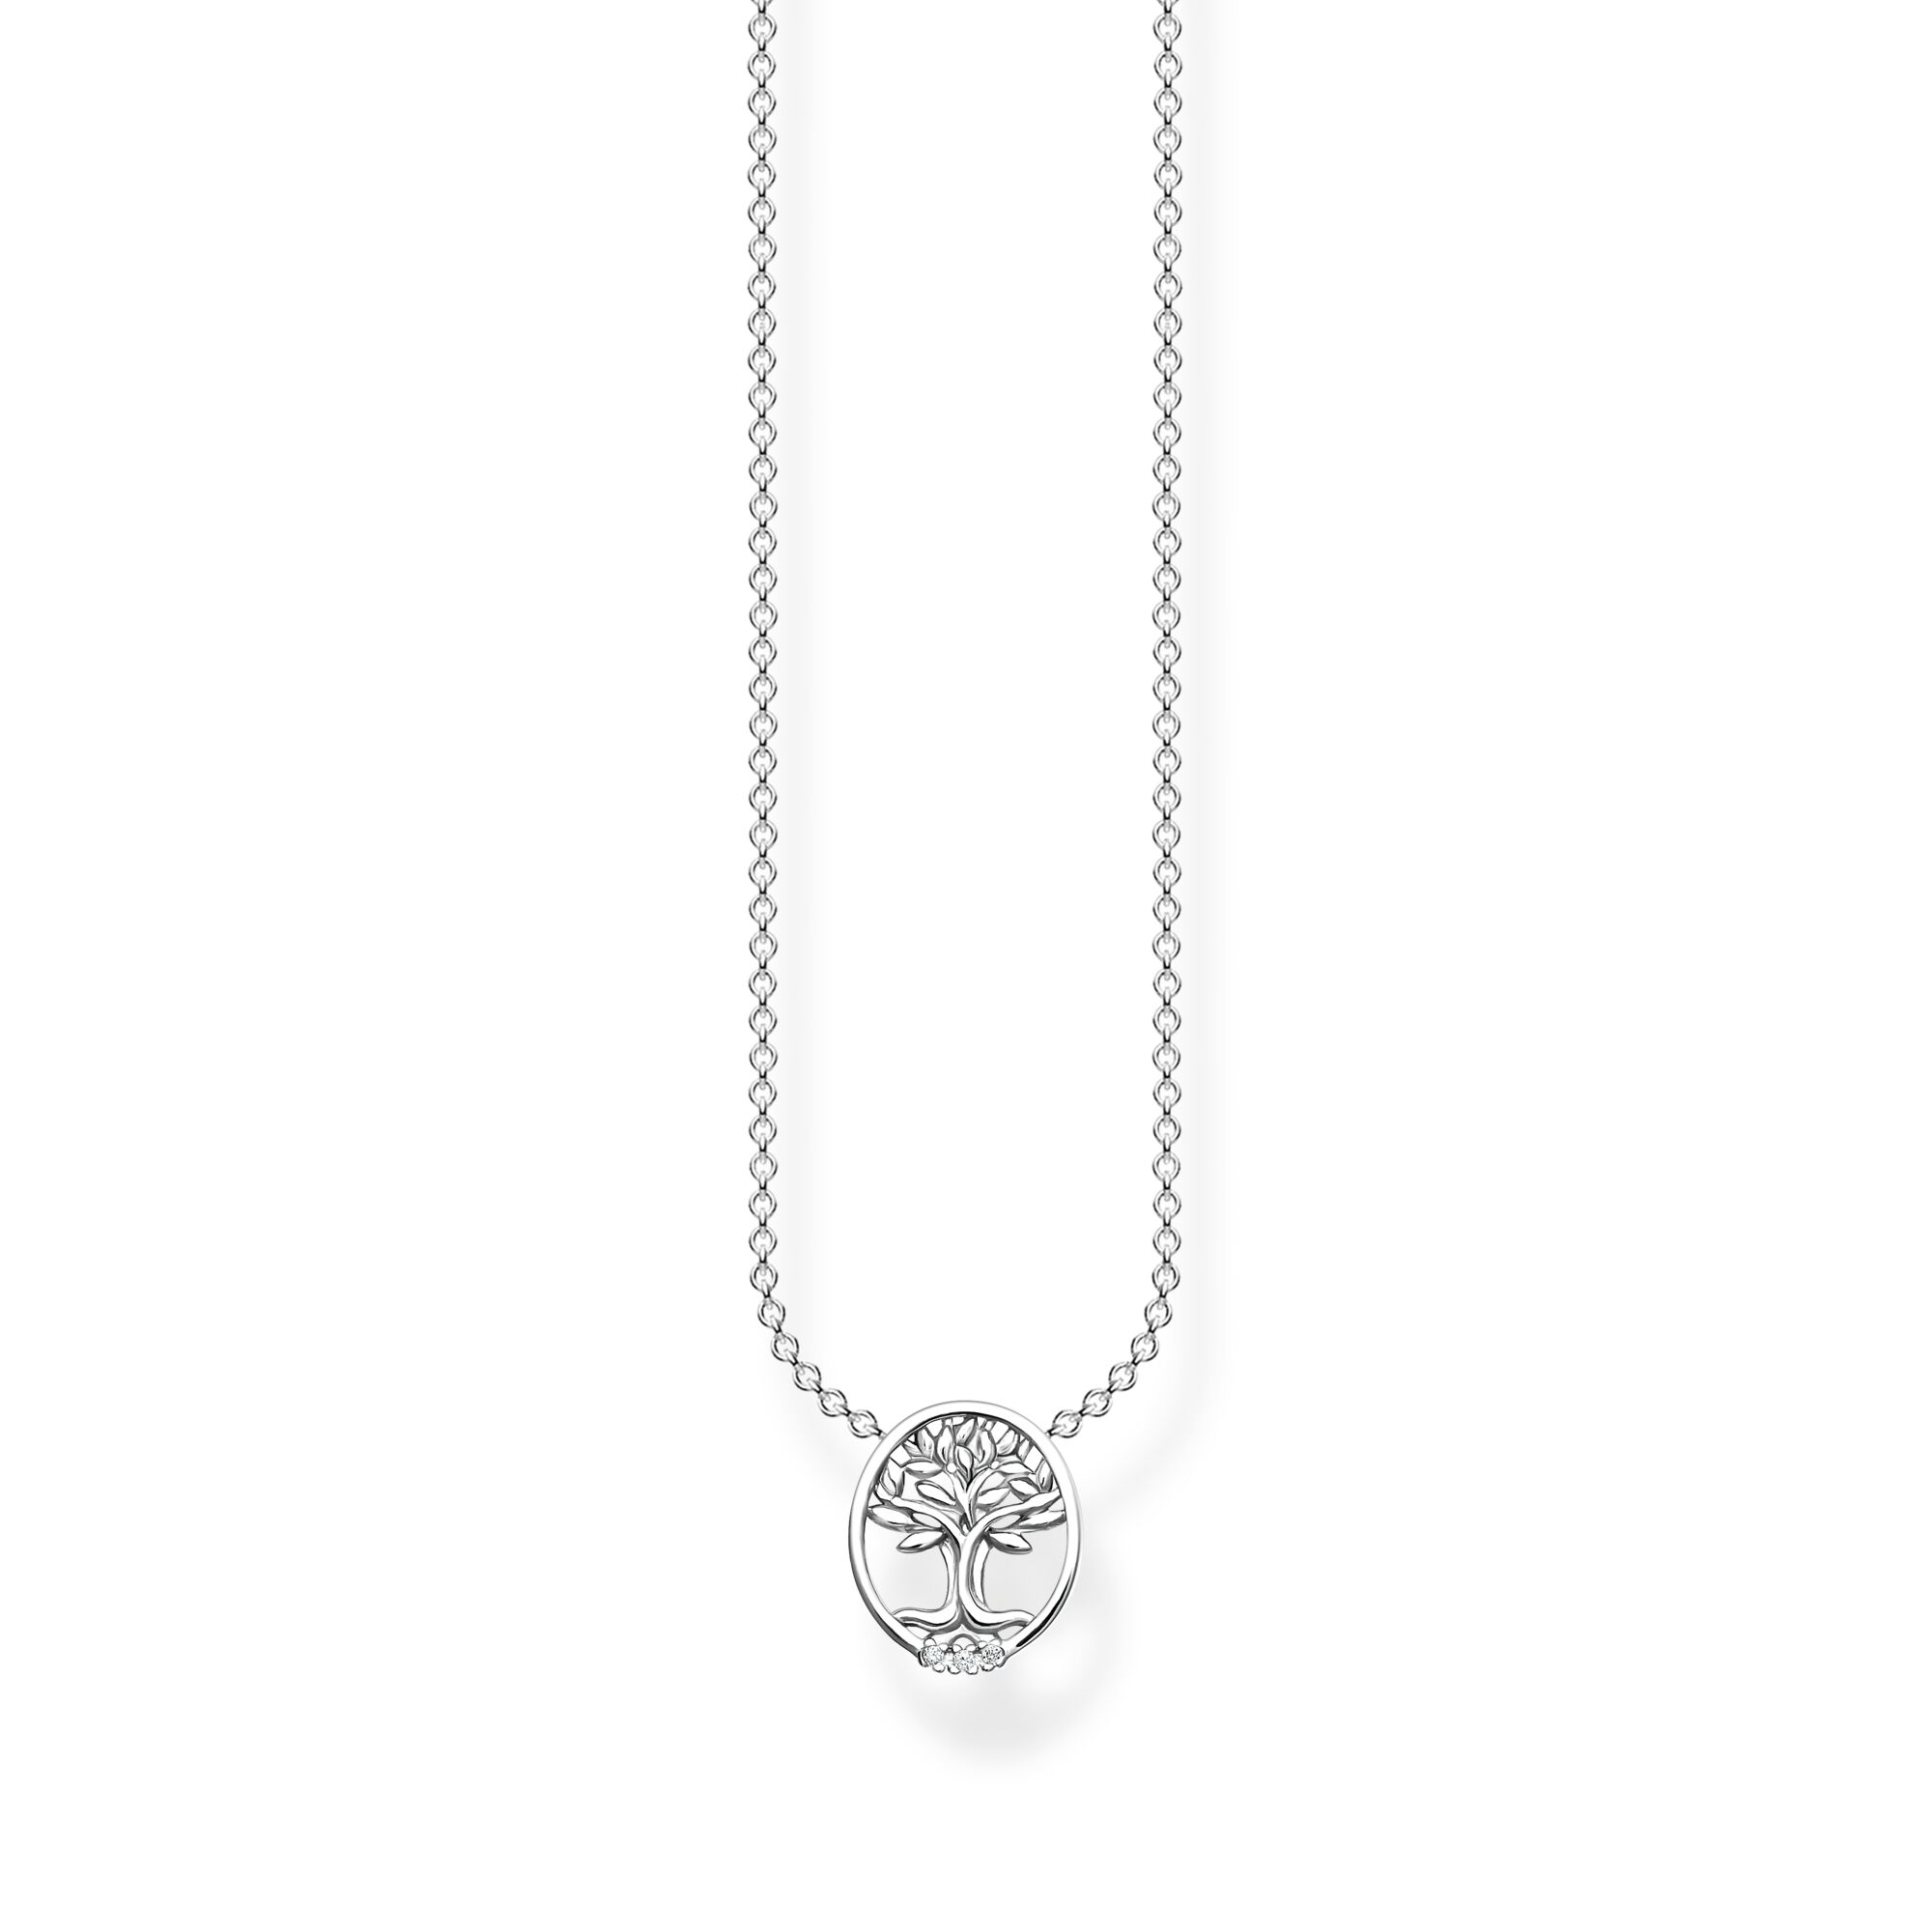 Necklace for men with five coins, silver | THOMAS SABO